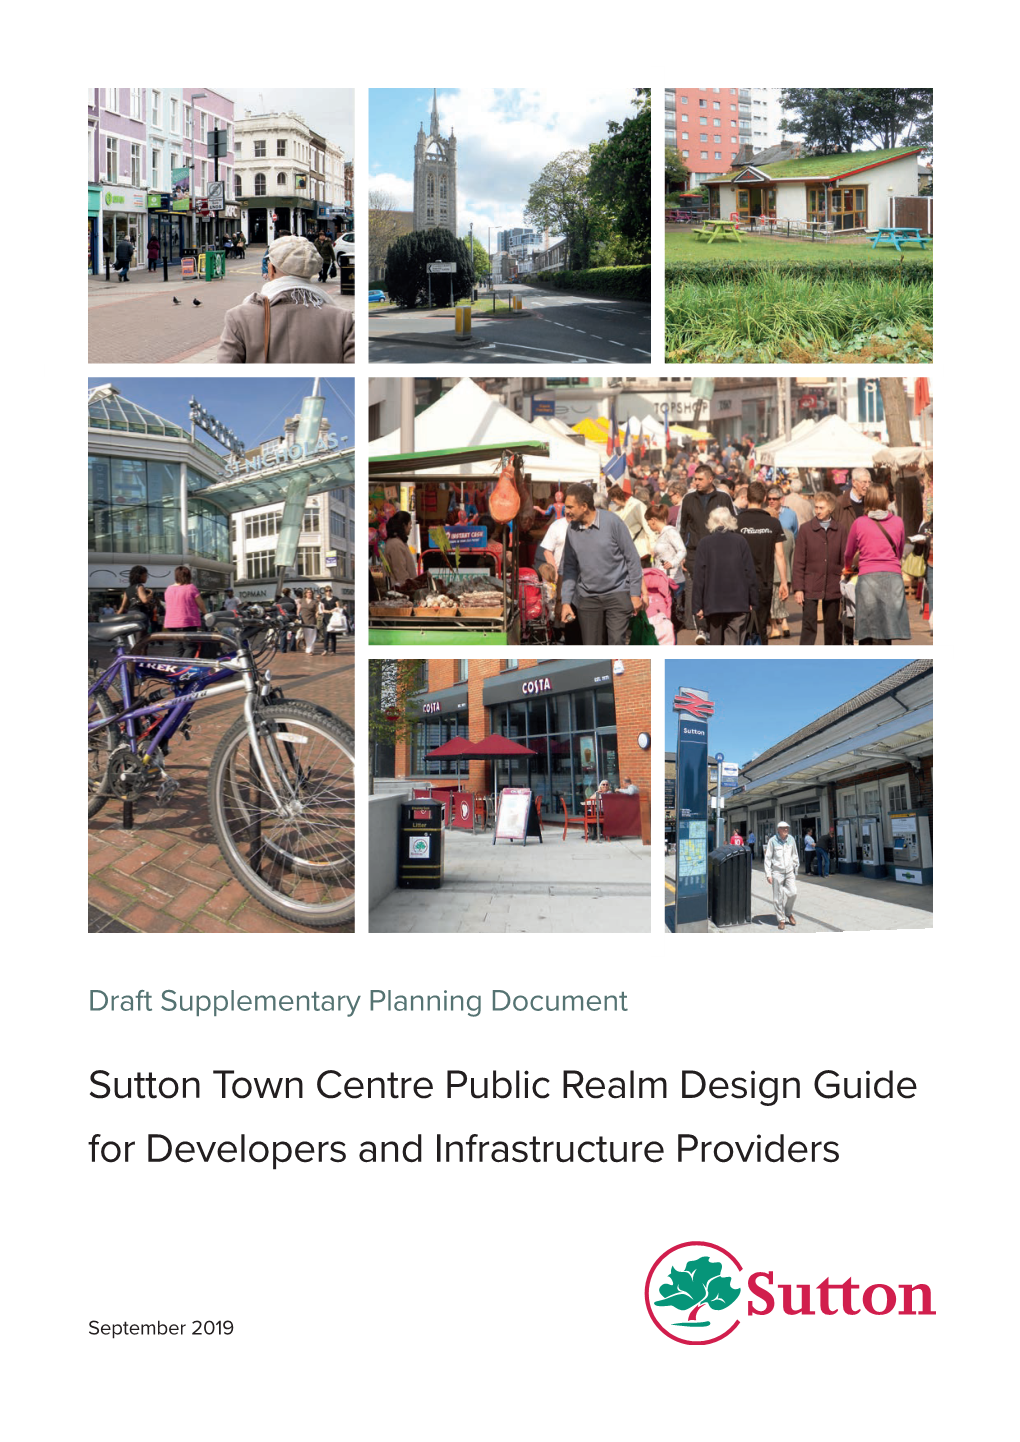 Sutton Town Centre Public Realm Design Guide for Developers and Infrastructure Providers